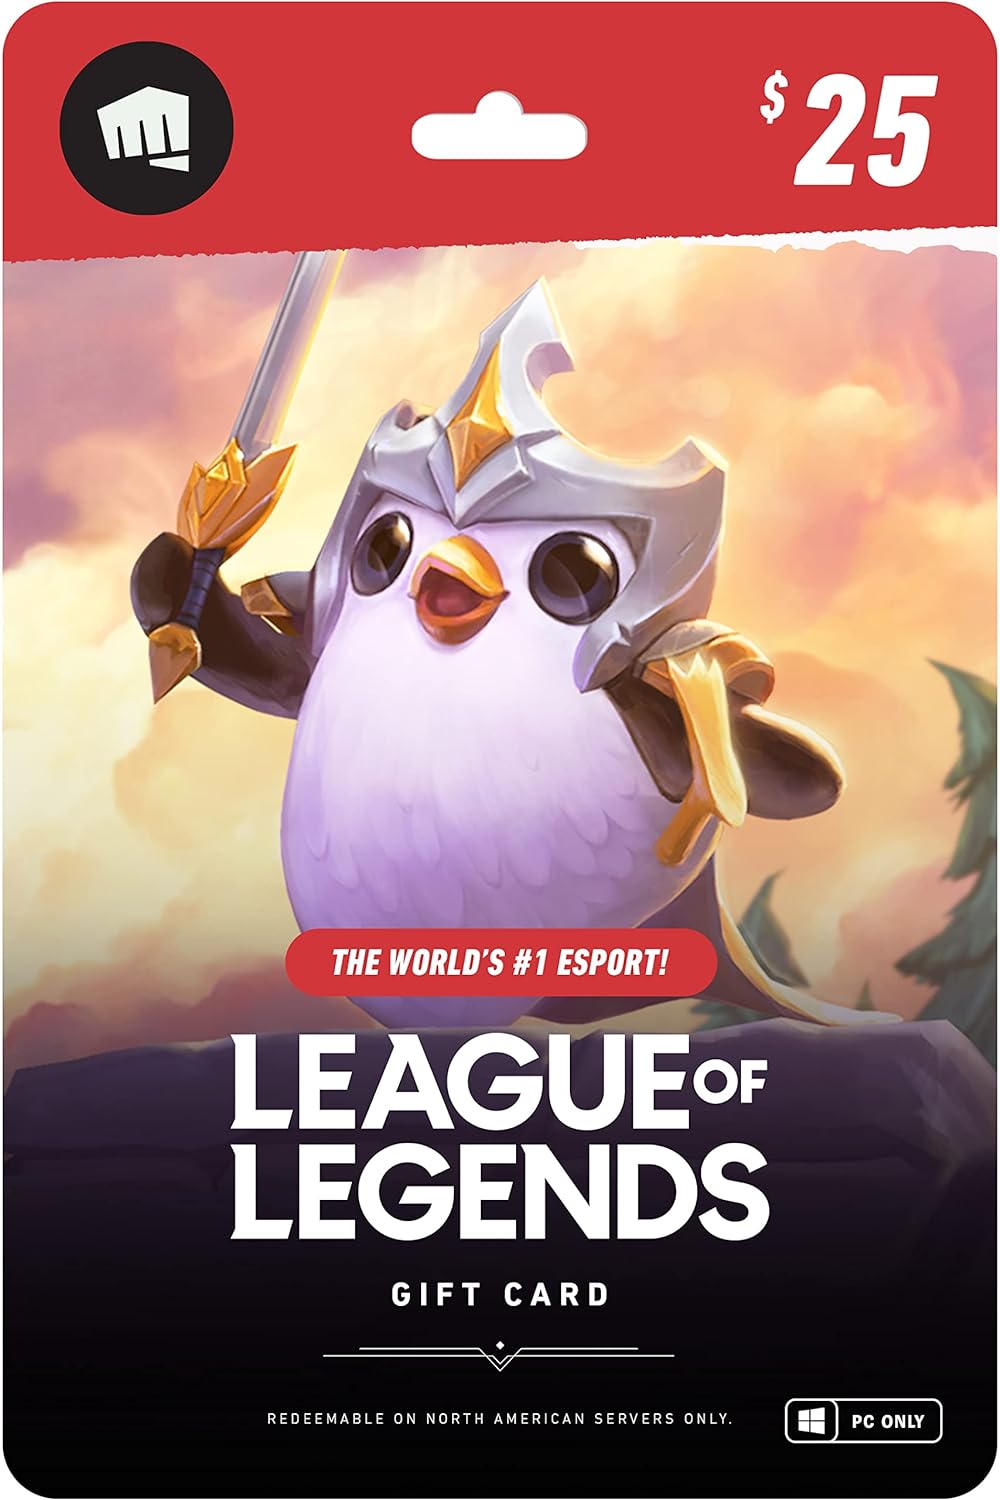 League of Legends $25 Gift Card